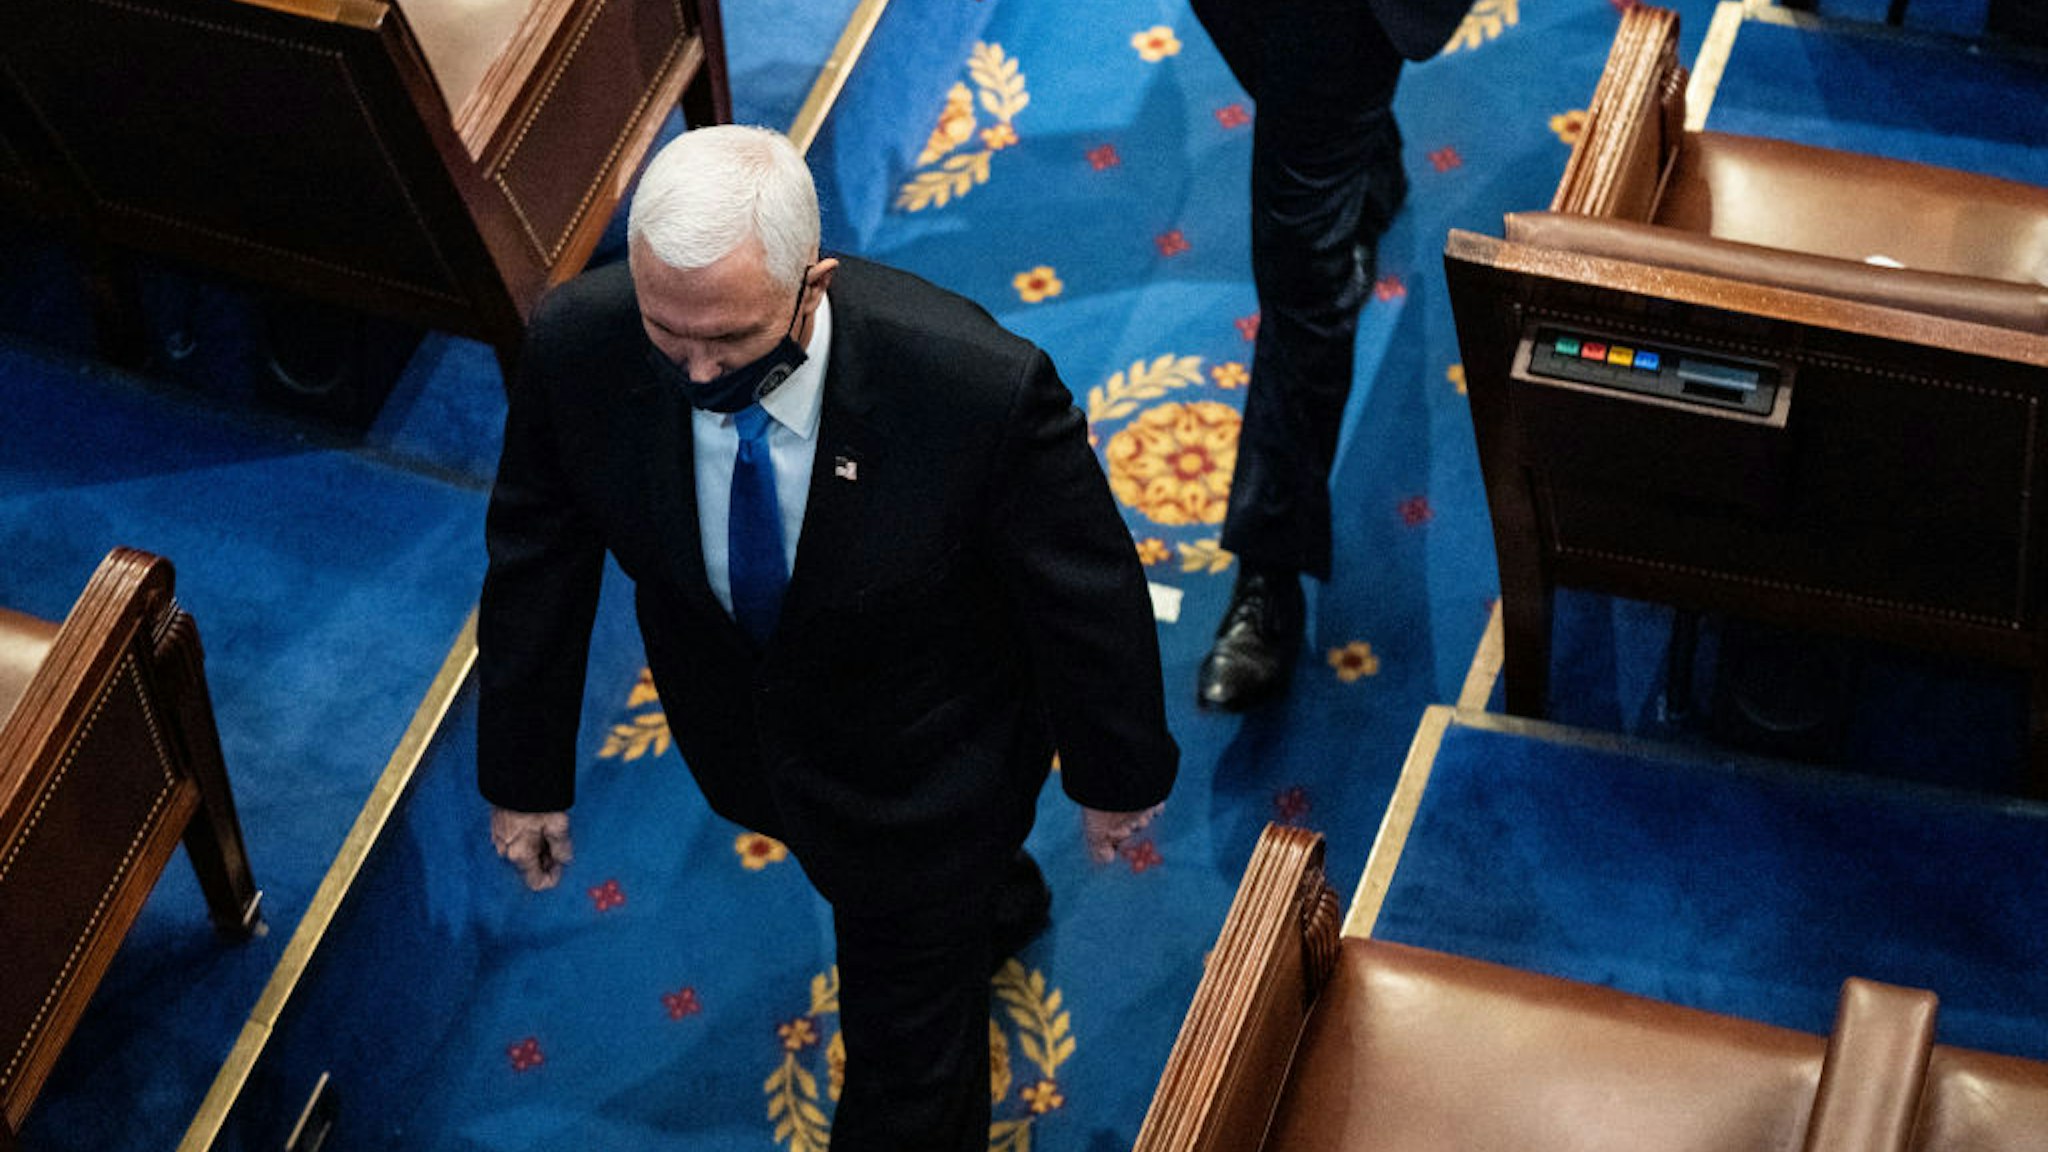 WASHINGTON, DC - JANUARY 06: U.S. Vice President Mike Pence walks off the House floor during a joint session of Congress to certify the 2020 Electoral College results on January 6, 2021 in Washington, DC. Congress held a joint session today to ratify President-elect Joe Biden's 306-232 Electoral College win over President Donald Trump. A group of Republican senators said they would reject the Electoral College votes of several states unless Congress appointed a commission to audit the election results. (Photo by Erin Schaff-Pool/Getty Images)